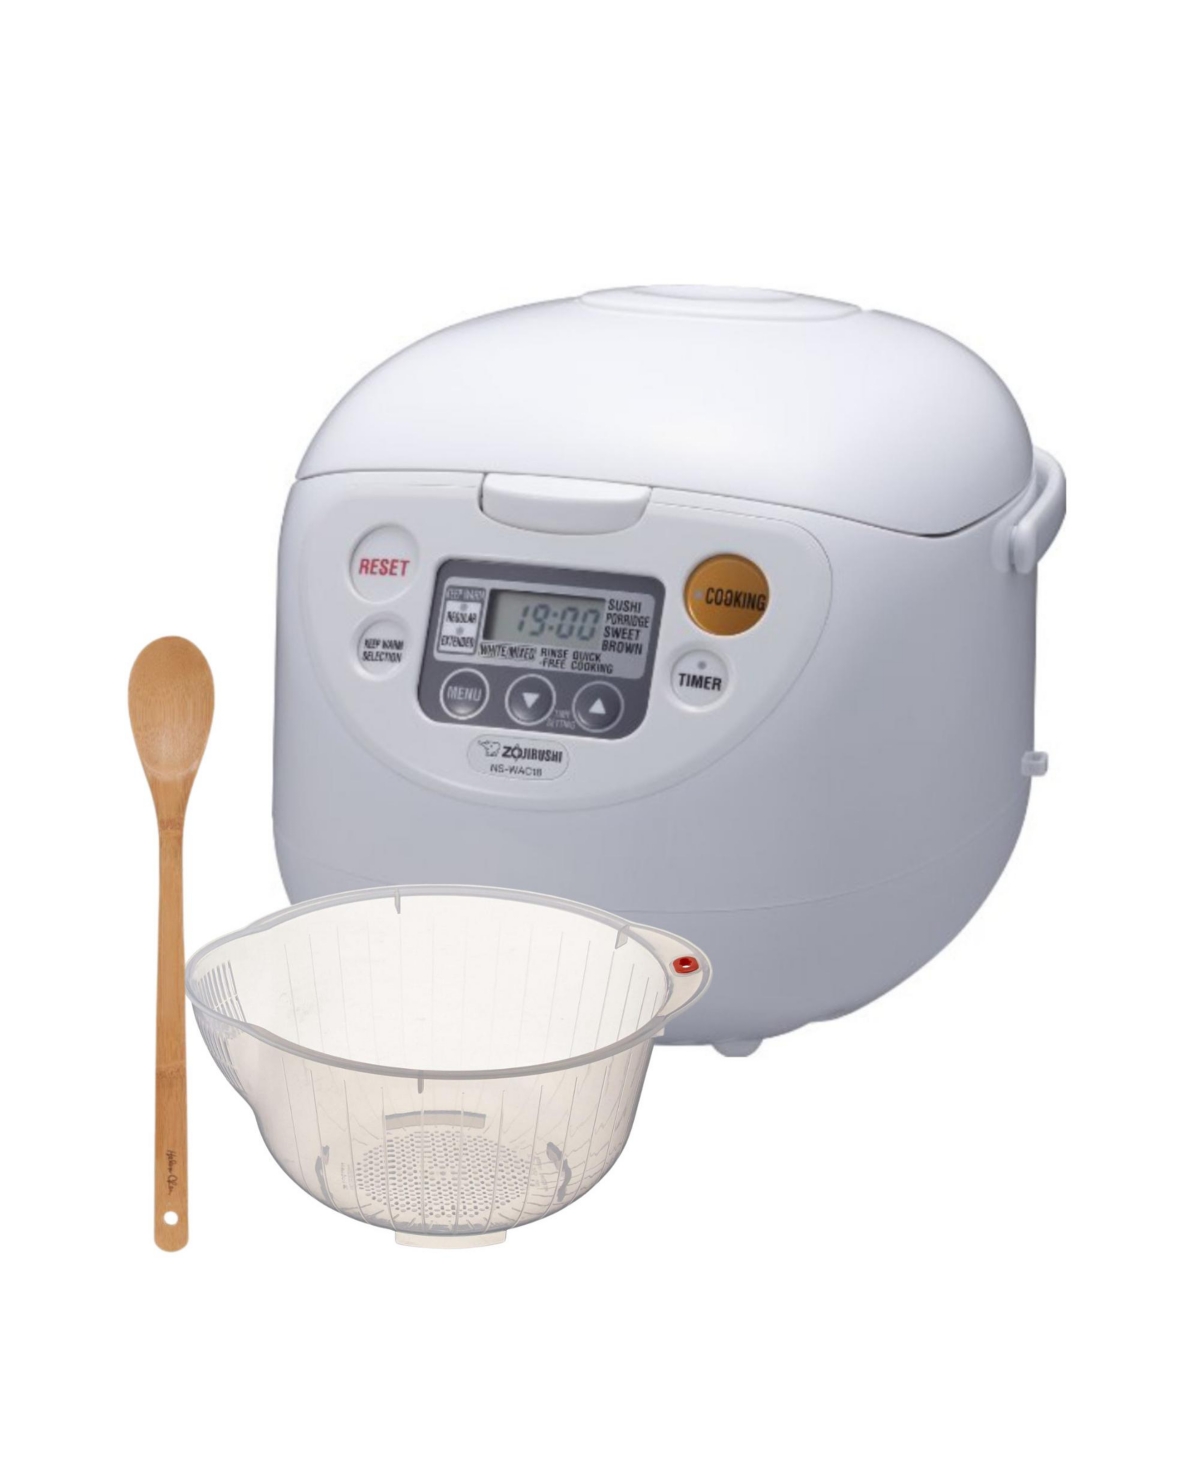 Micom Rice Cooker and Warmer (10-Cup/ Cool White) with Bowl and Spoon - White